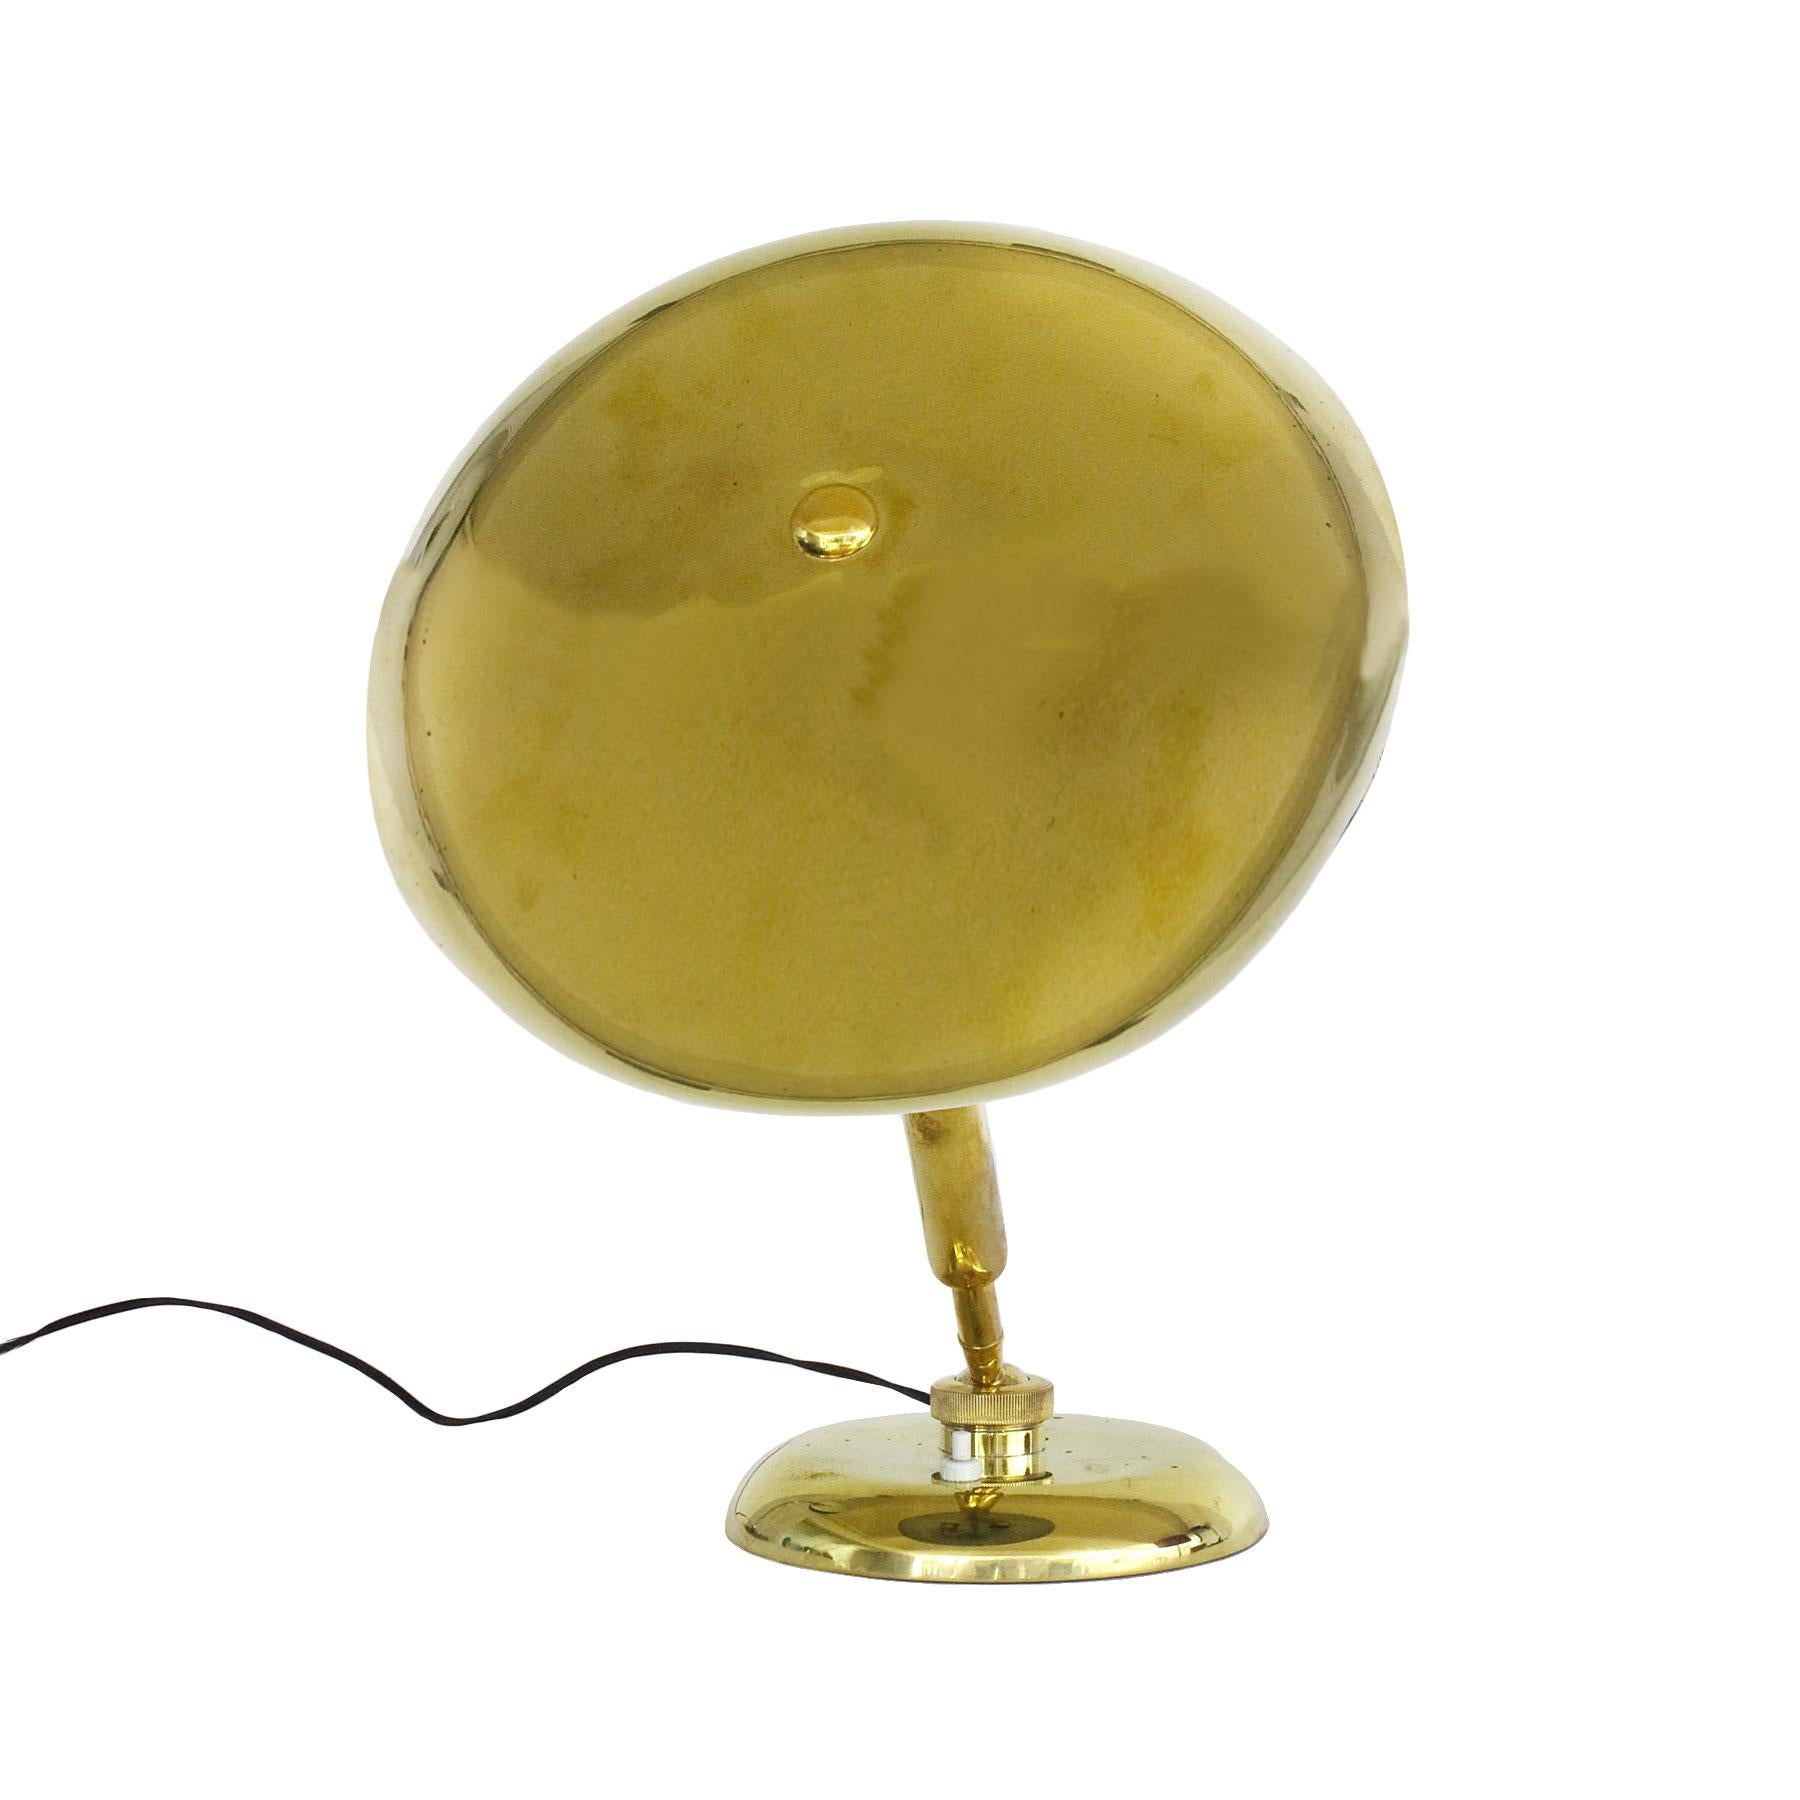 Polished brass desk lamp, two inclination systems, nice quality,

Italy, circa 1950.
Two items in stock.